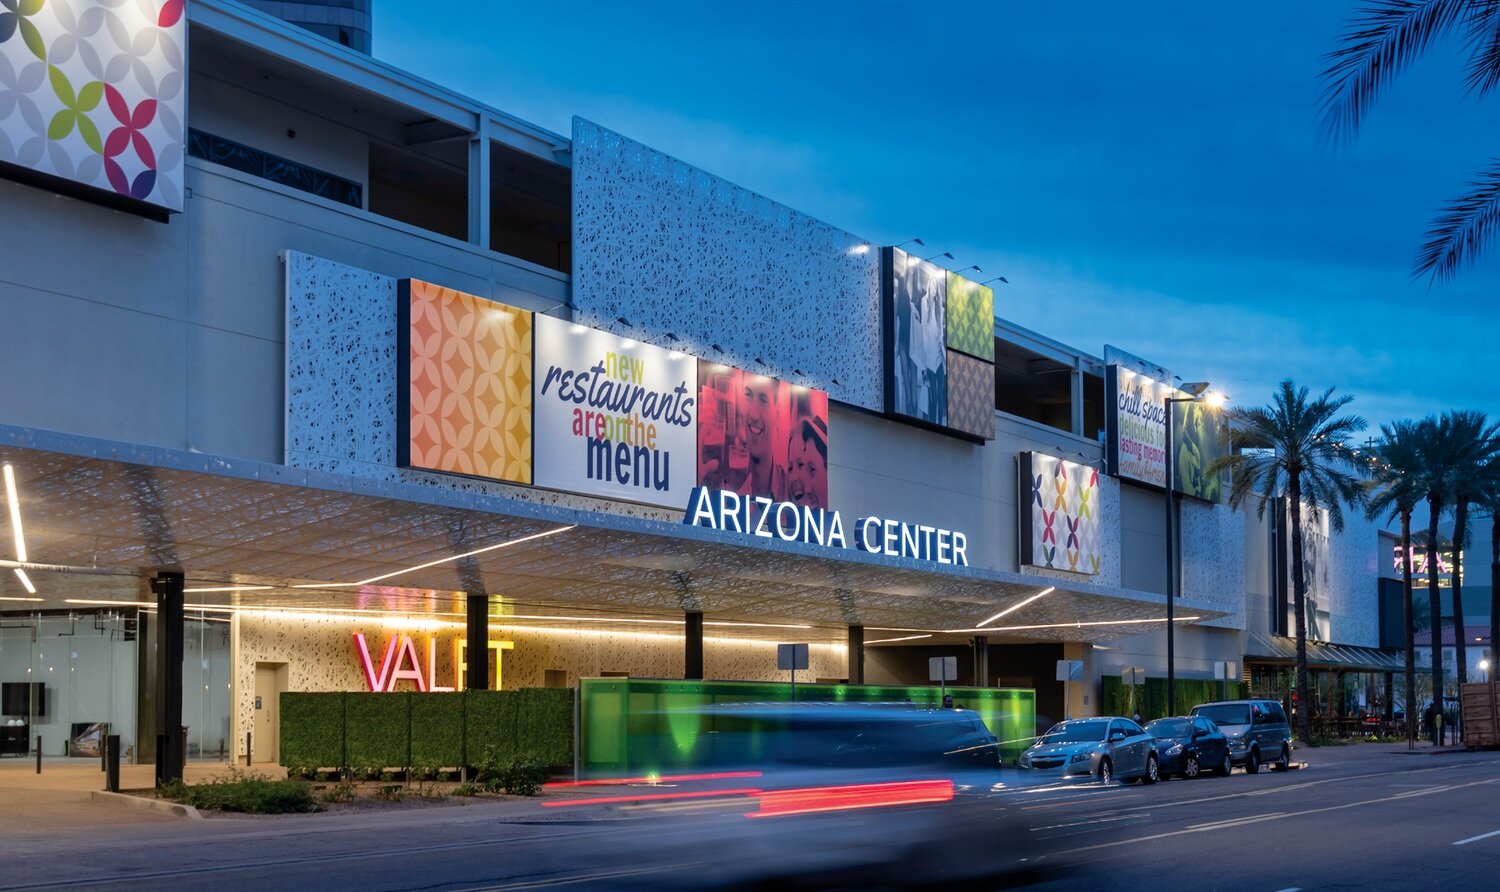 The renovated Arizona Center activates the surrounding streets with vibrant graphics, signage, landscape and lighting.